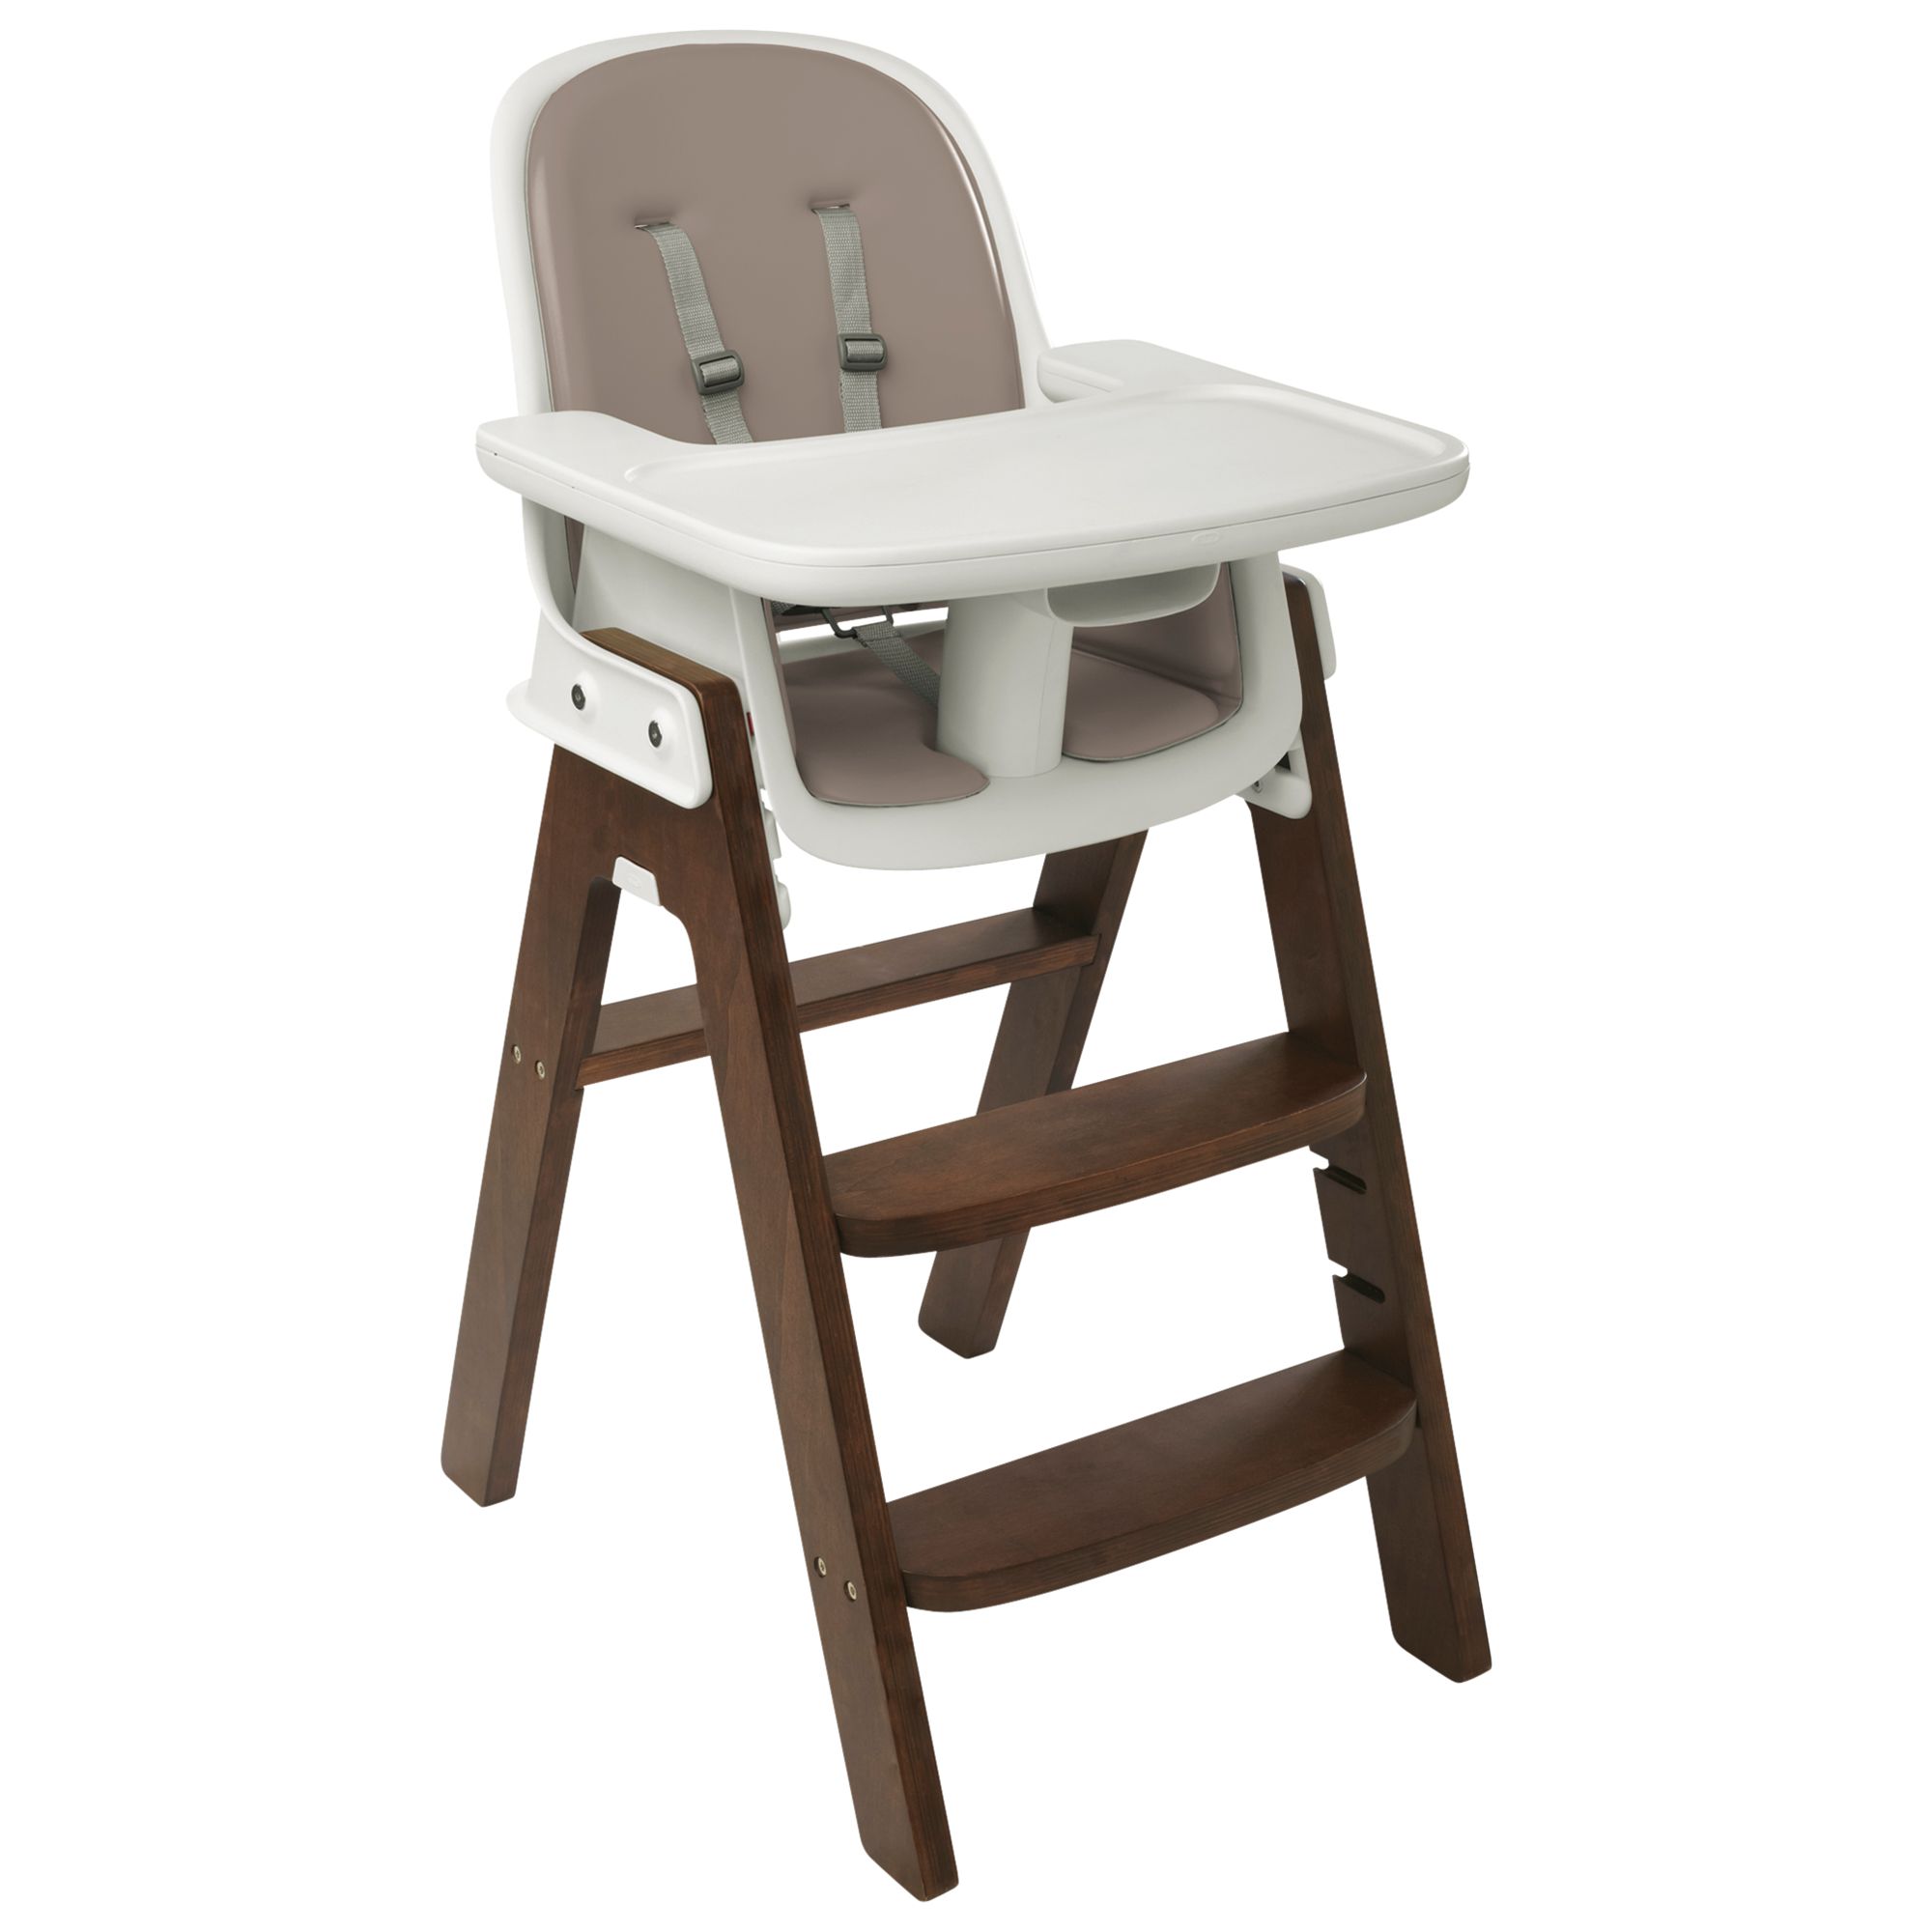 OXO Tot Sprout Highchair in Taupe and Walnut